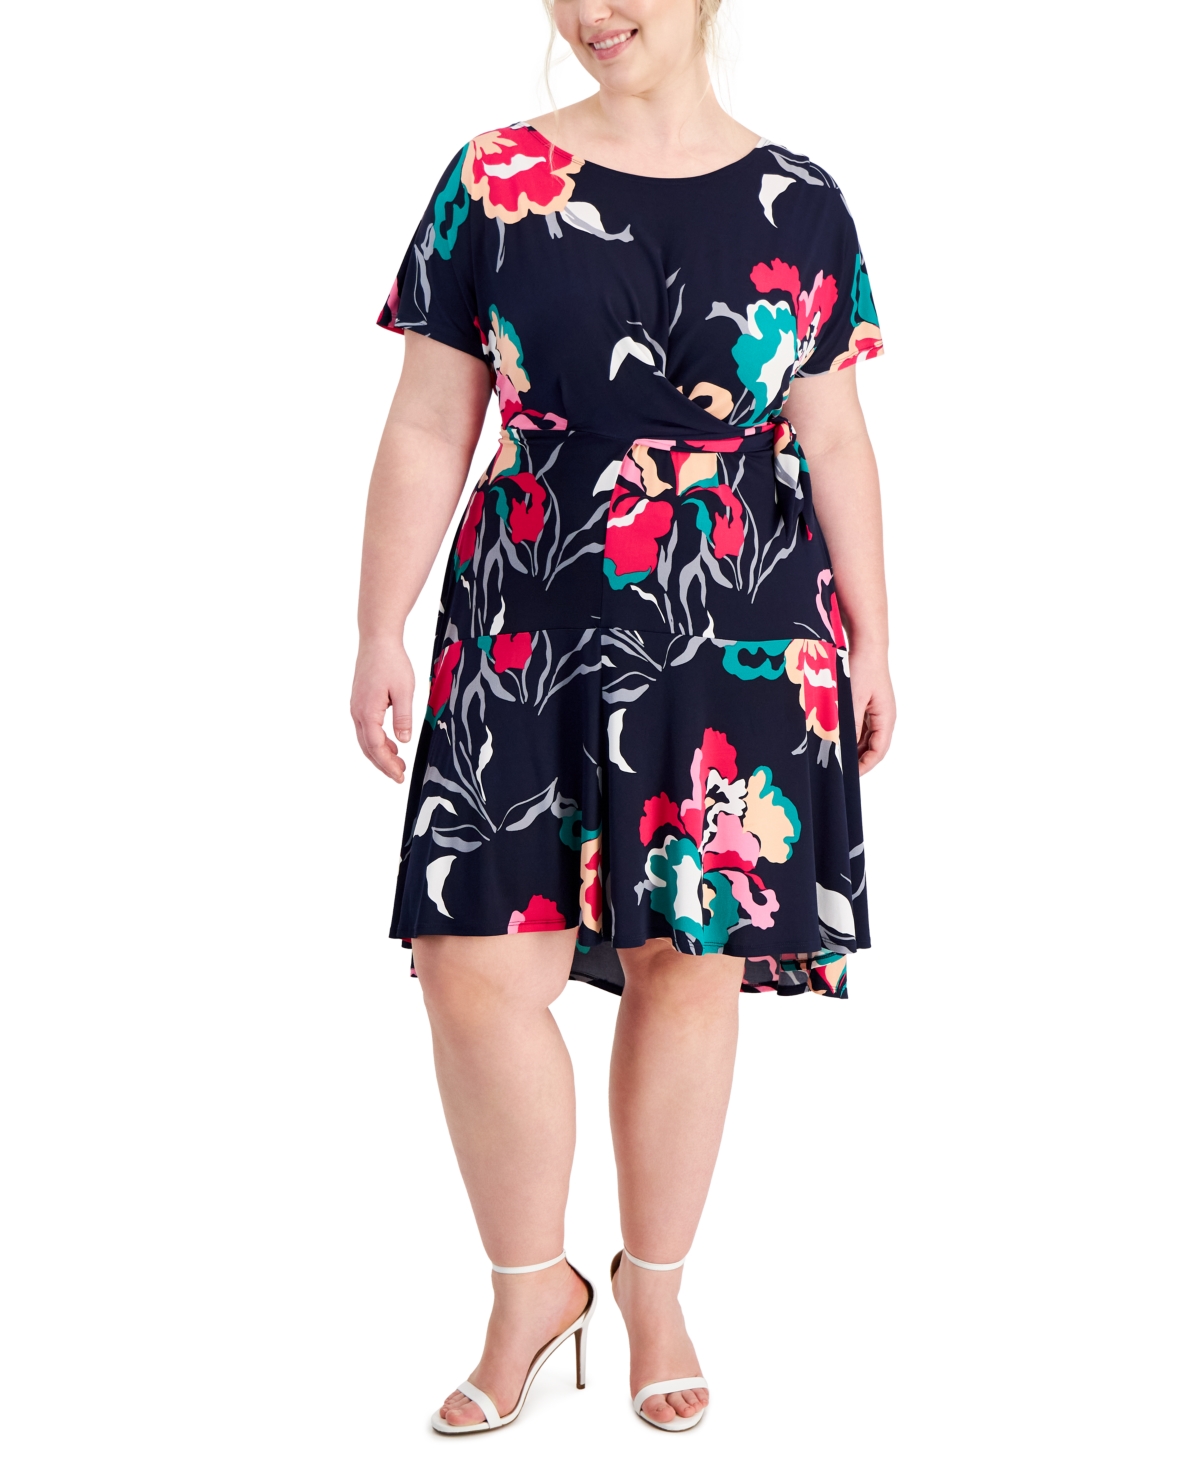 Plus Size Printed Tied-Side Fit & Flare Dress - Navy/pink/